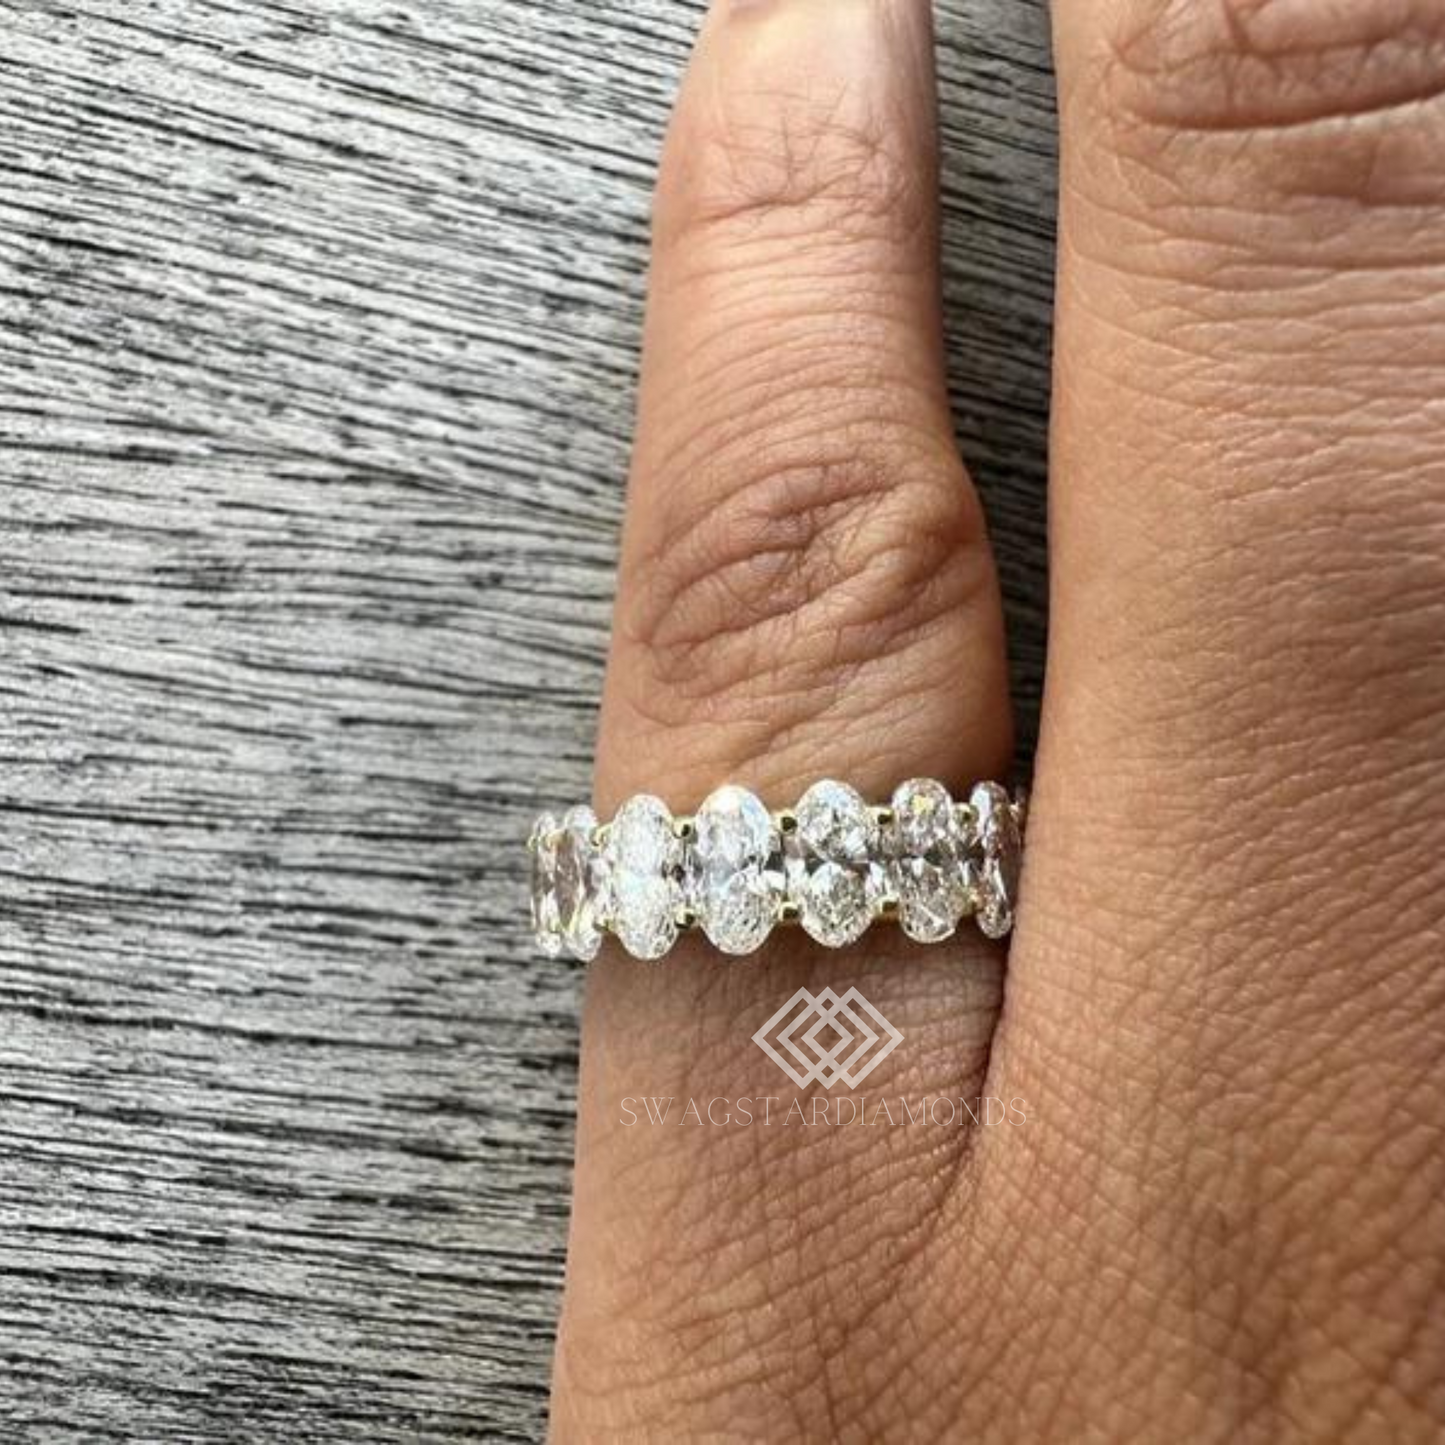 Oval Cut Ring With Lab-Grown & Natural Diamonds, Jewelry By Leading Manufacturer From Swagstar, Surat. Explore Wedding, Engagement, Eternity Rings,  Earring & Studs, Bracelets In 10k, 14k, & 18k Gold Varieties, Including White, Yellow, Rose Gold.